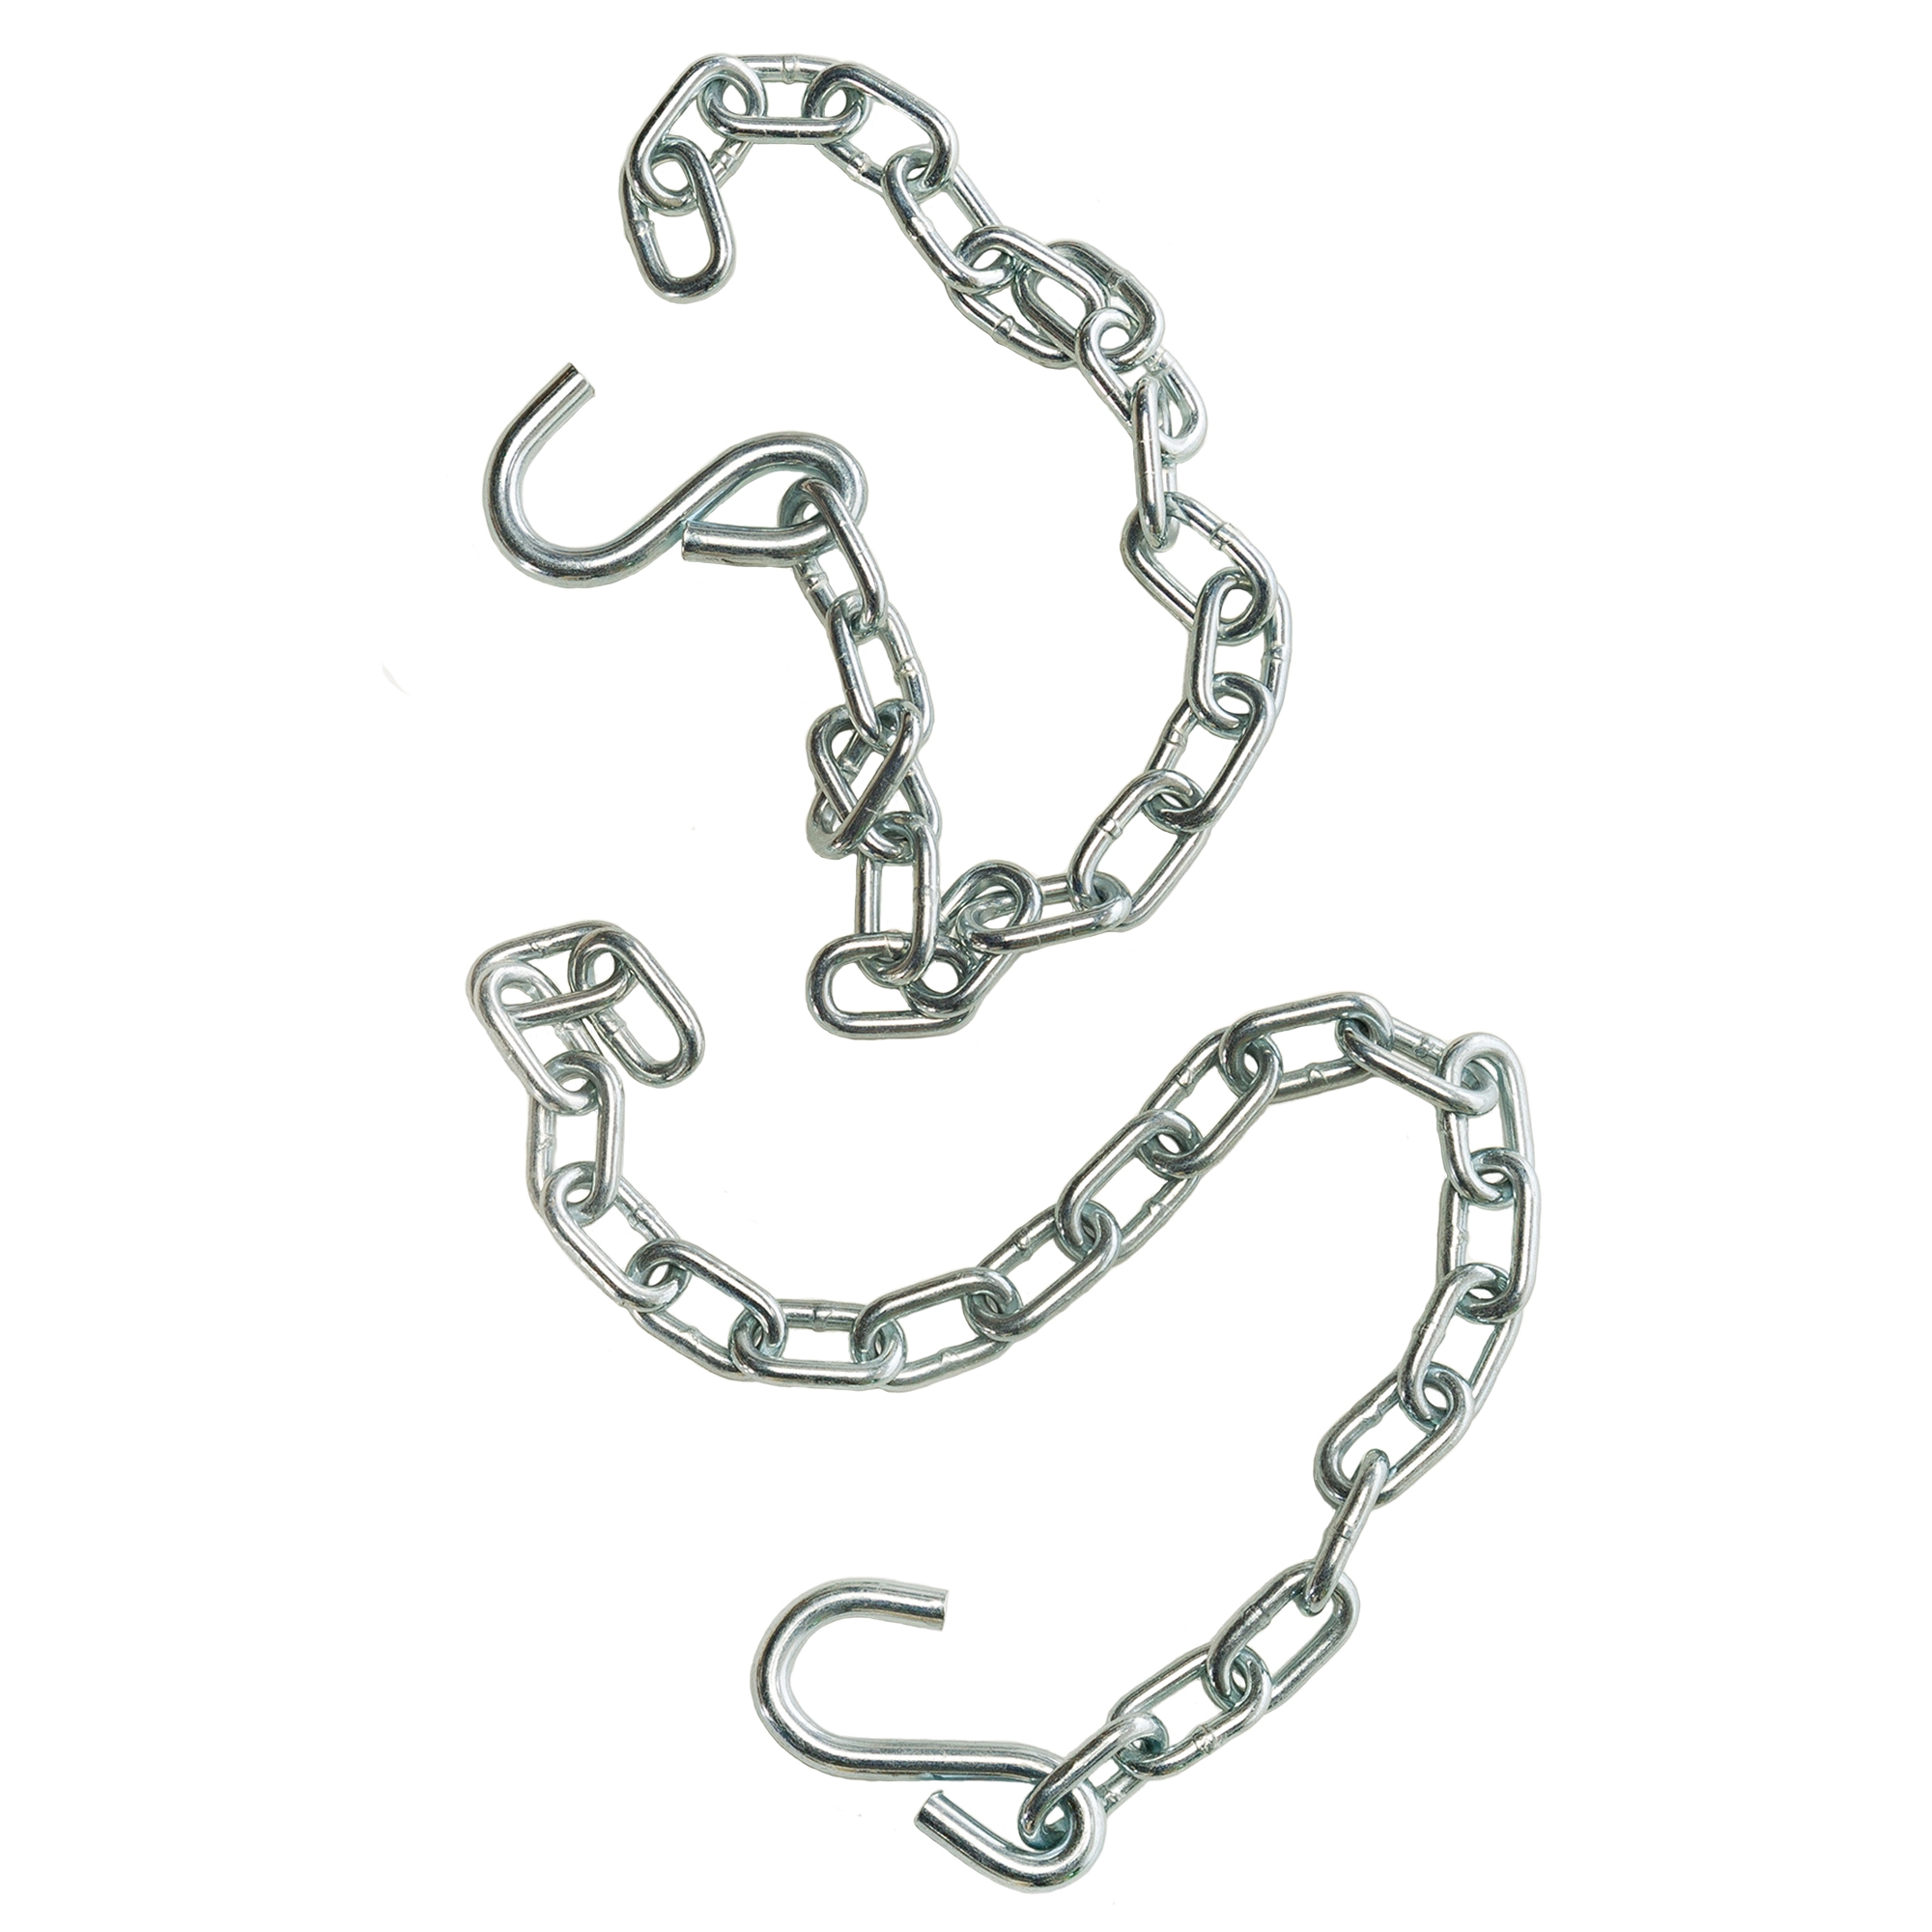 Hammock Extension Chains (2) on Sale | 9257-K